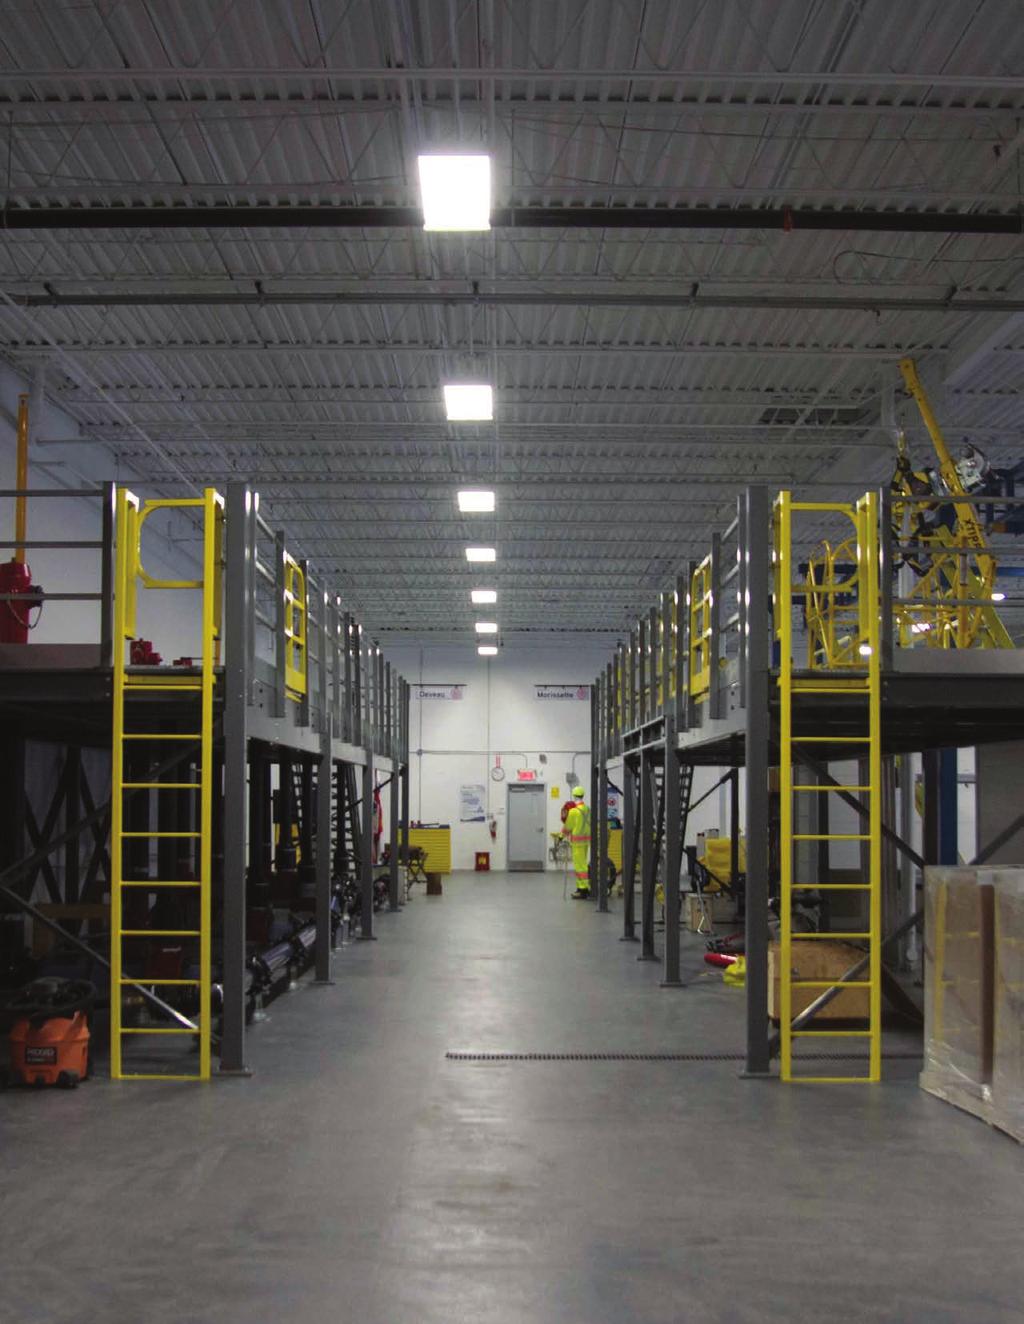 12 13 Ladders Ladders The majority of building codes and fire regulations require multiple access points for any second-level mezzanine structure.